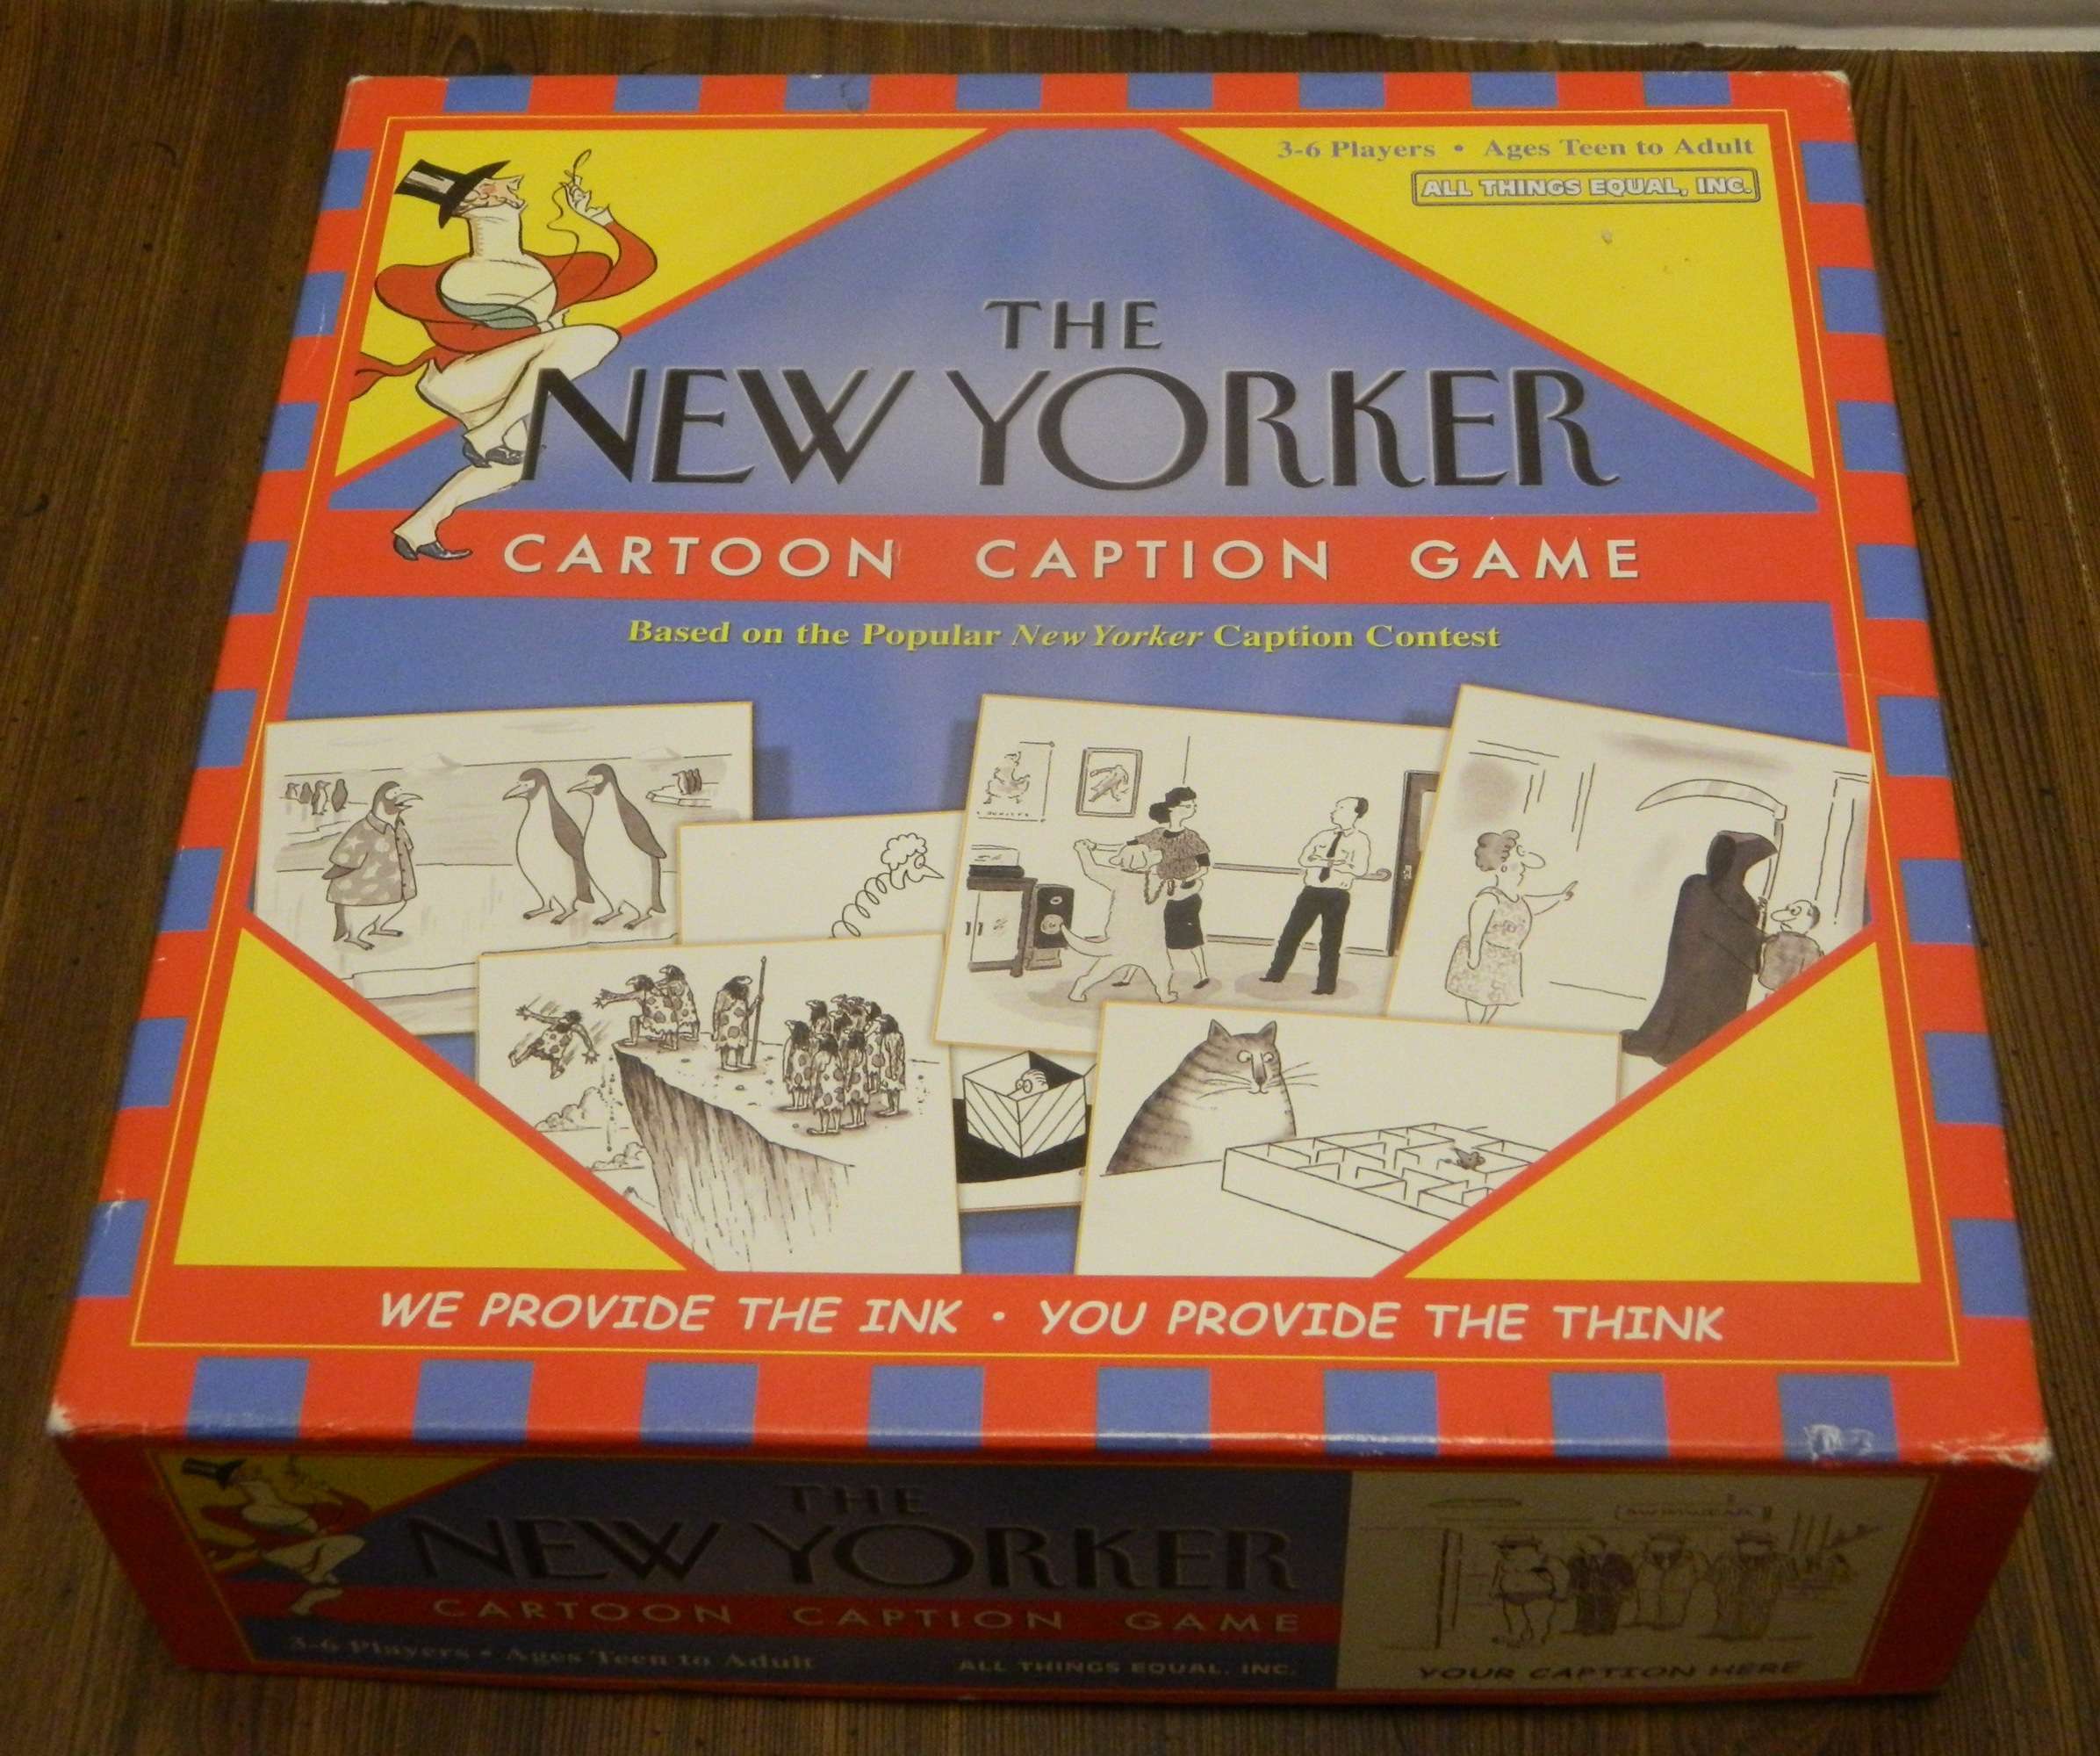 The New Yorker: Cartoon Caption Game Party Game Review and Instructions